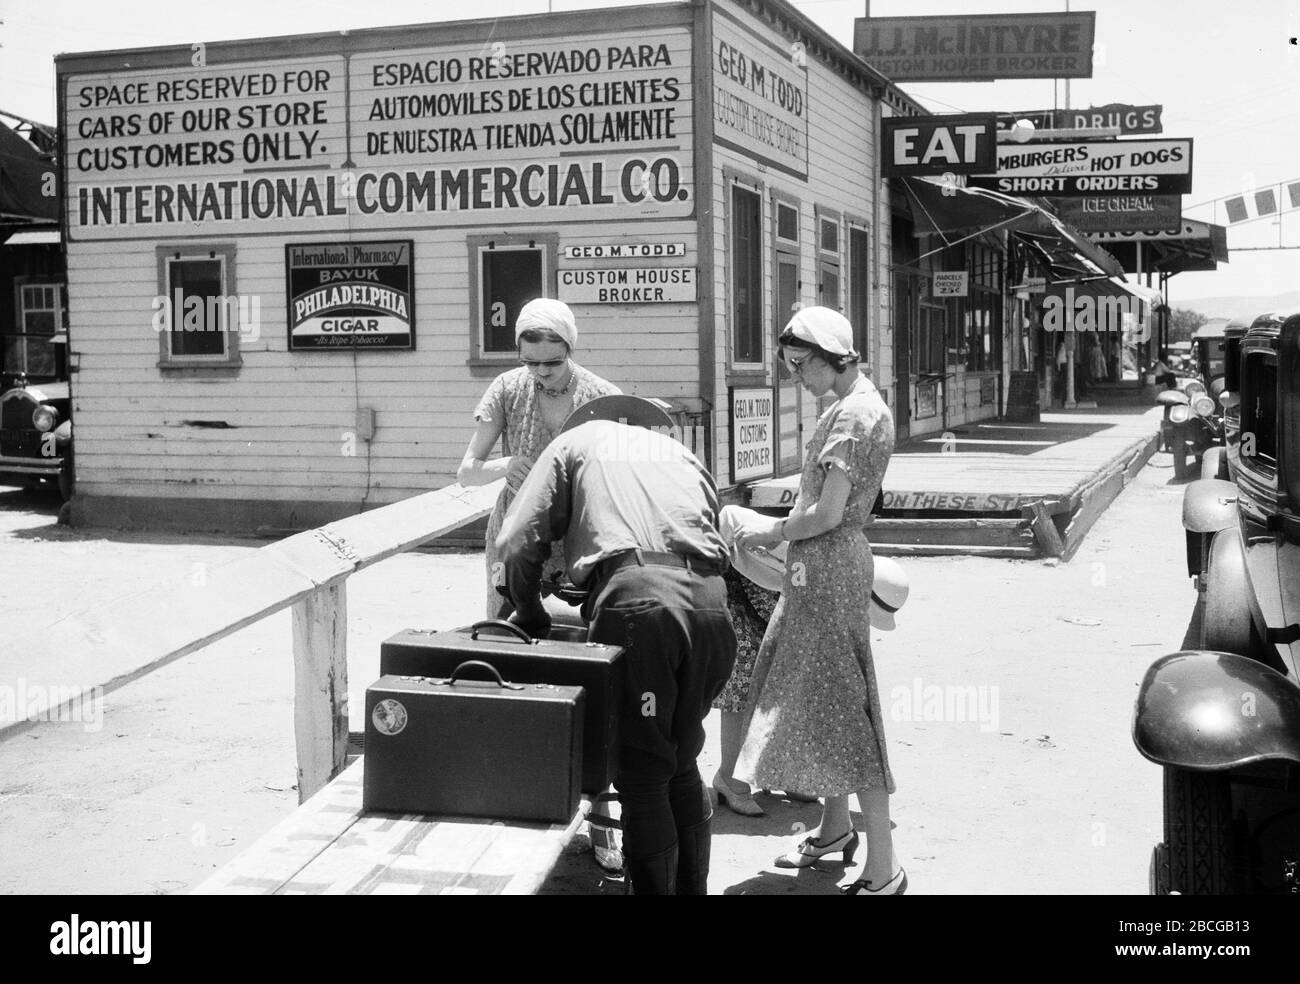 A male U.S. Customs Inspector examines baggage belonging to women at the United States - Mexico border at Tijuana, Mexico and San Ysidro, California, 1920s. Nearby are shops and offices for Customs